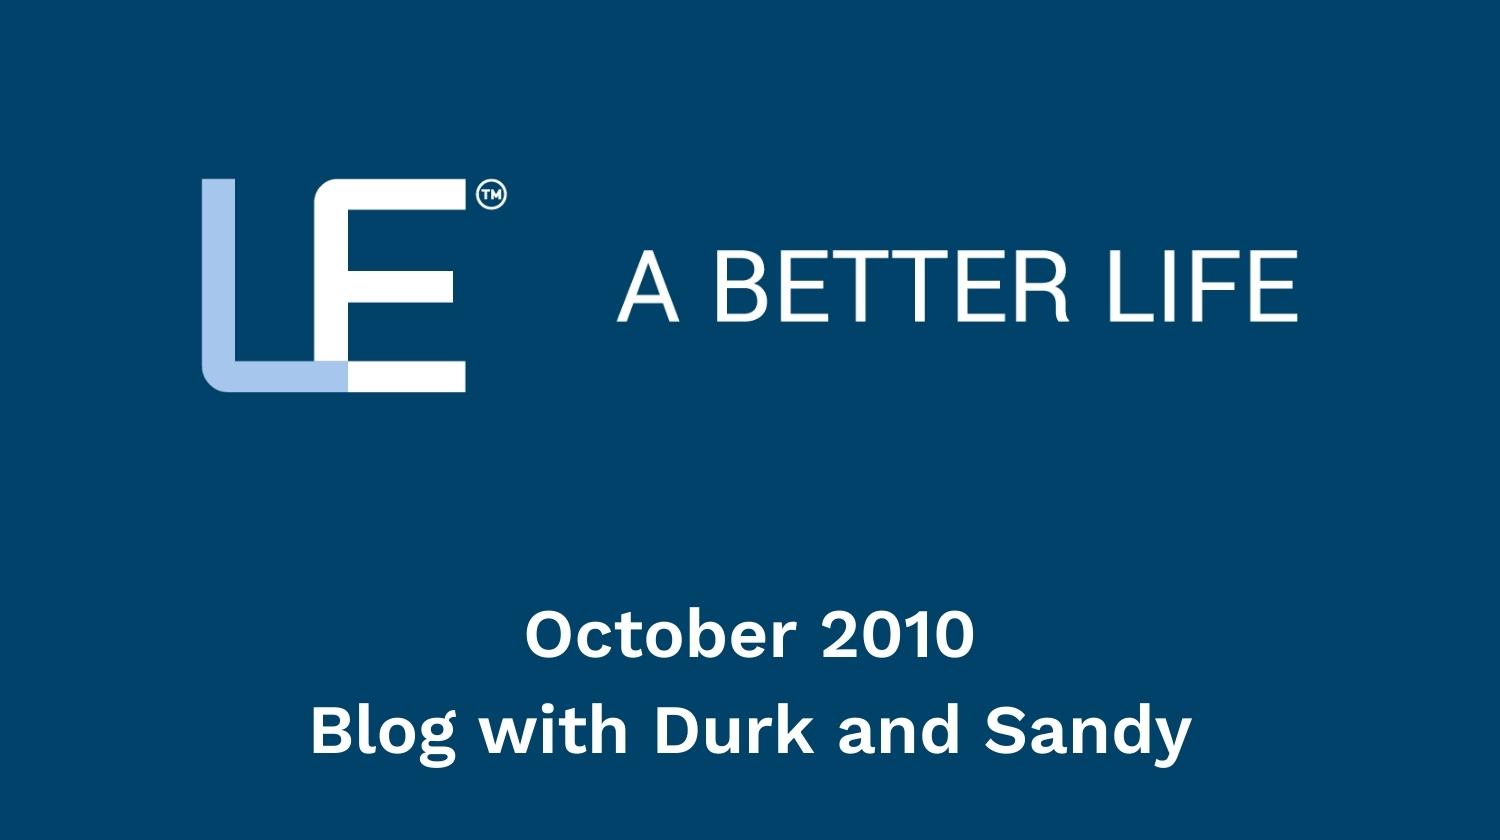 October 2010 Blog with Durk and Sandy